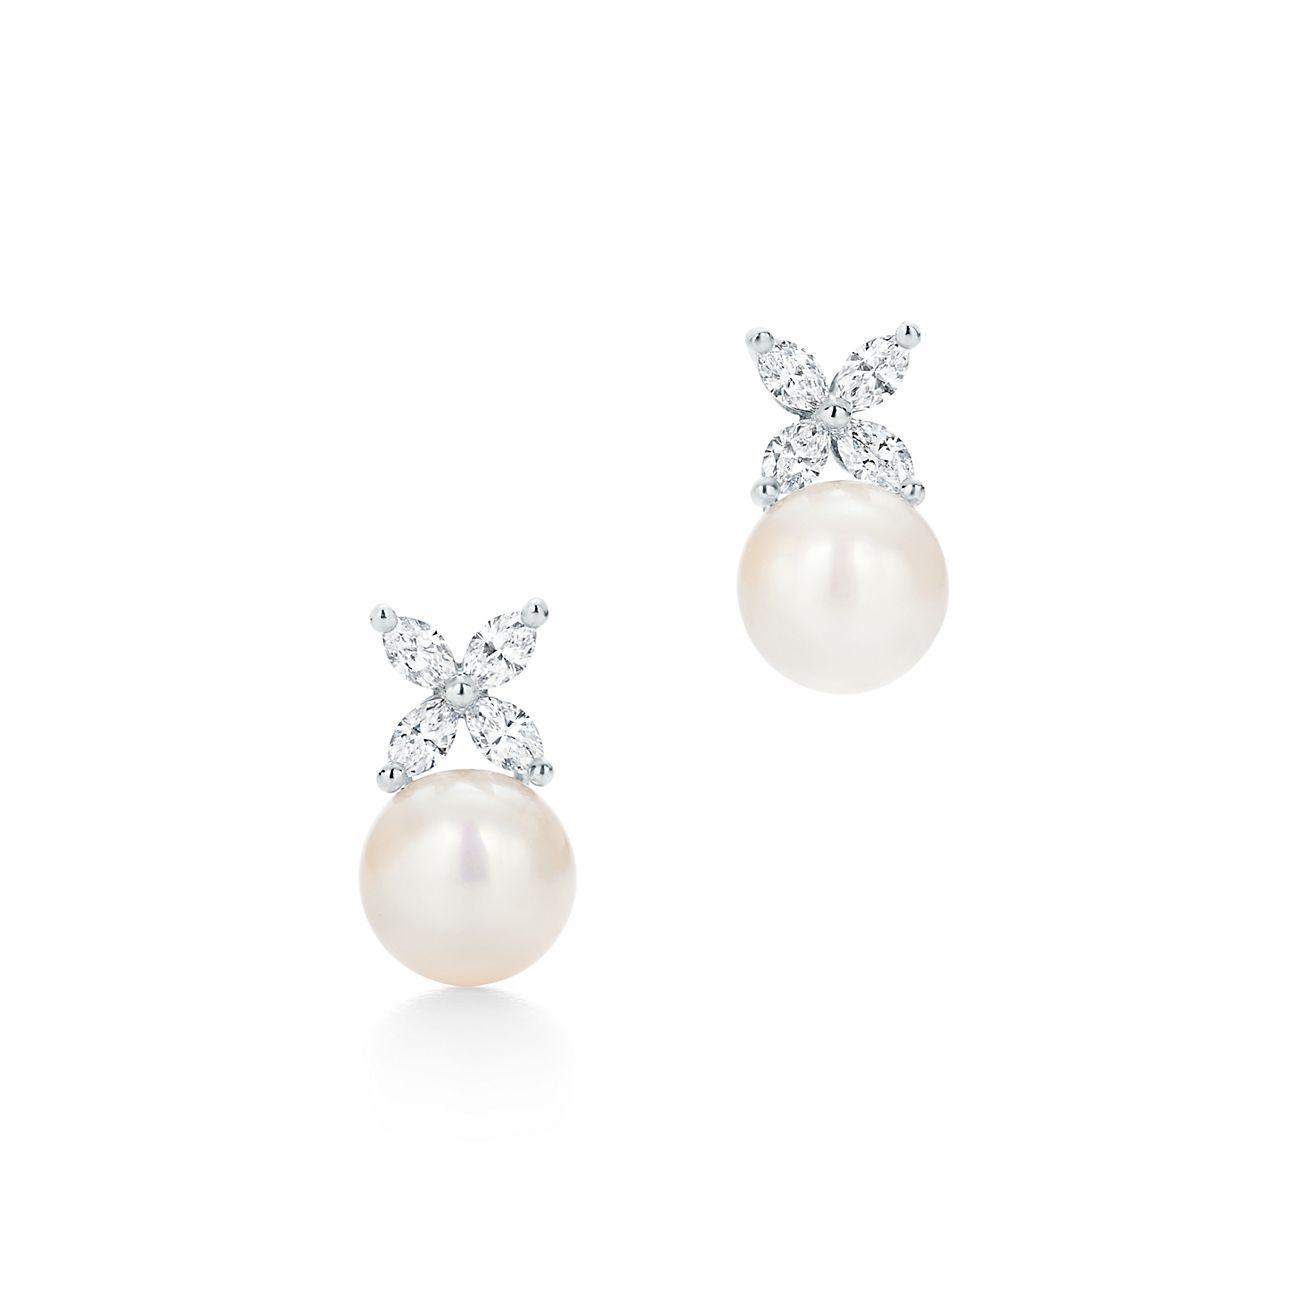 tiffany pearl necklace and earring set